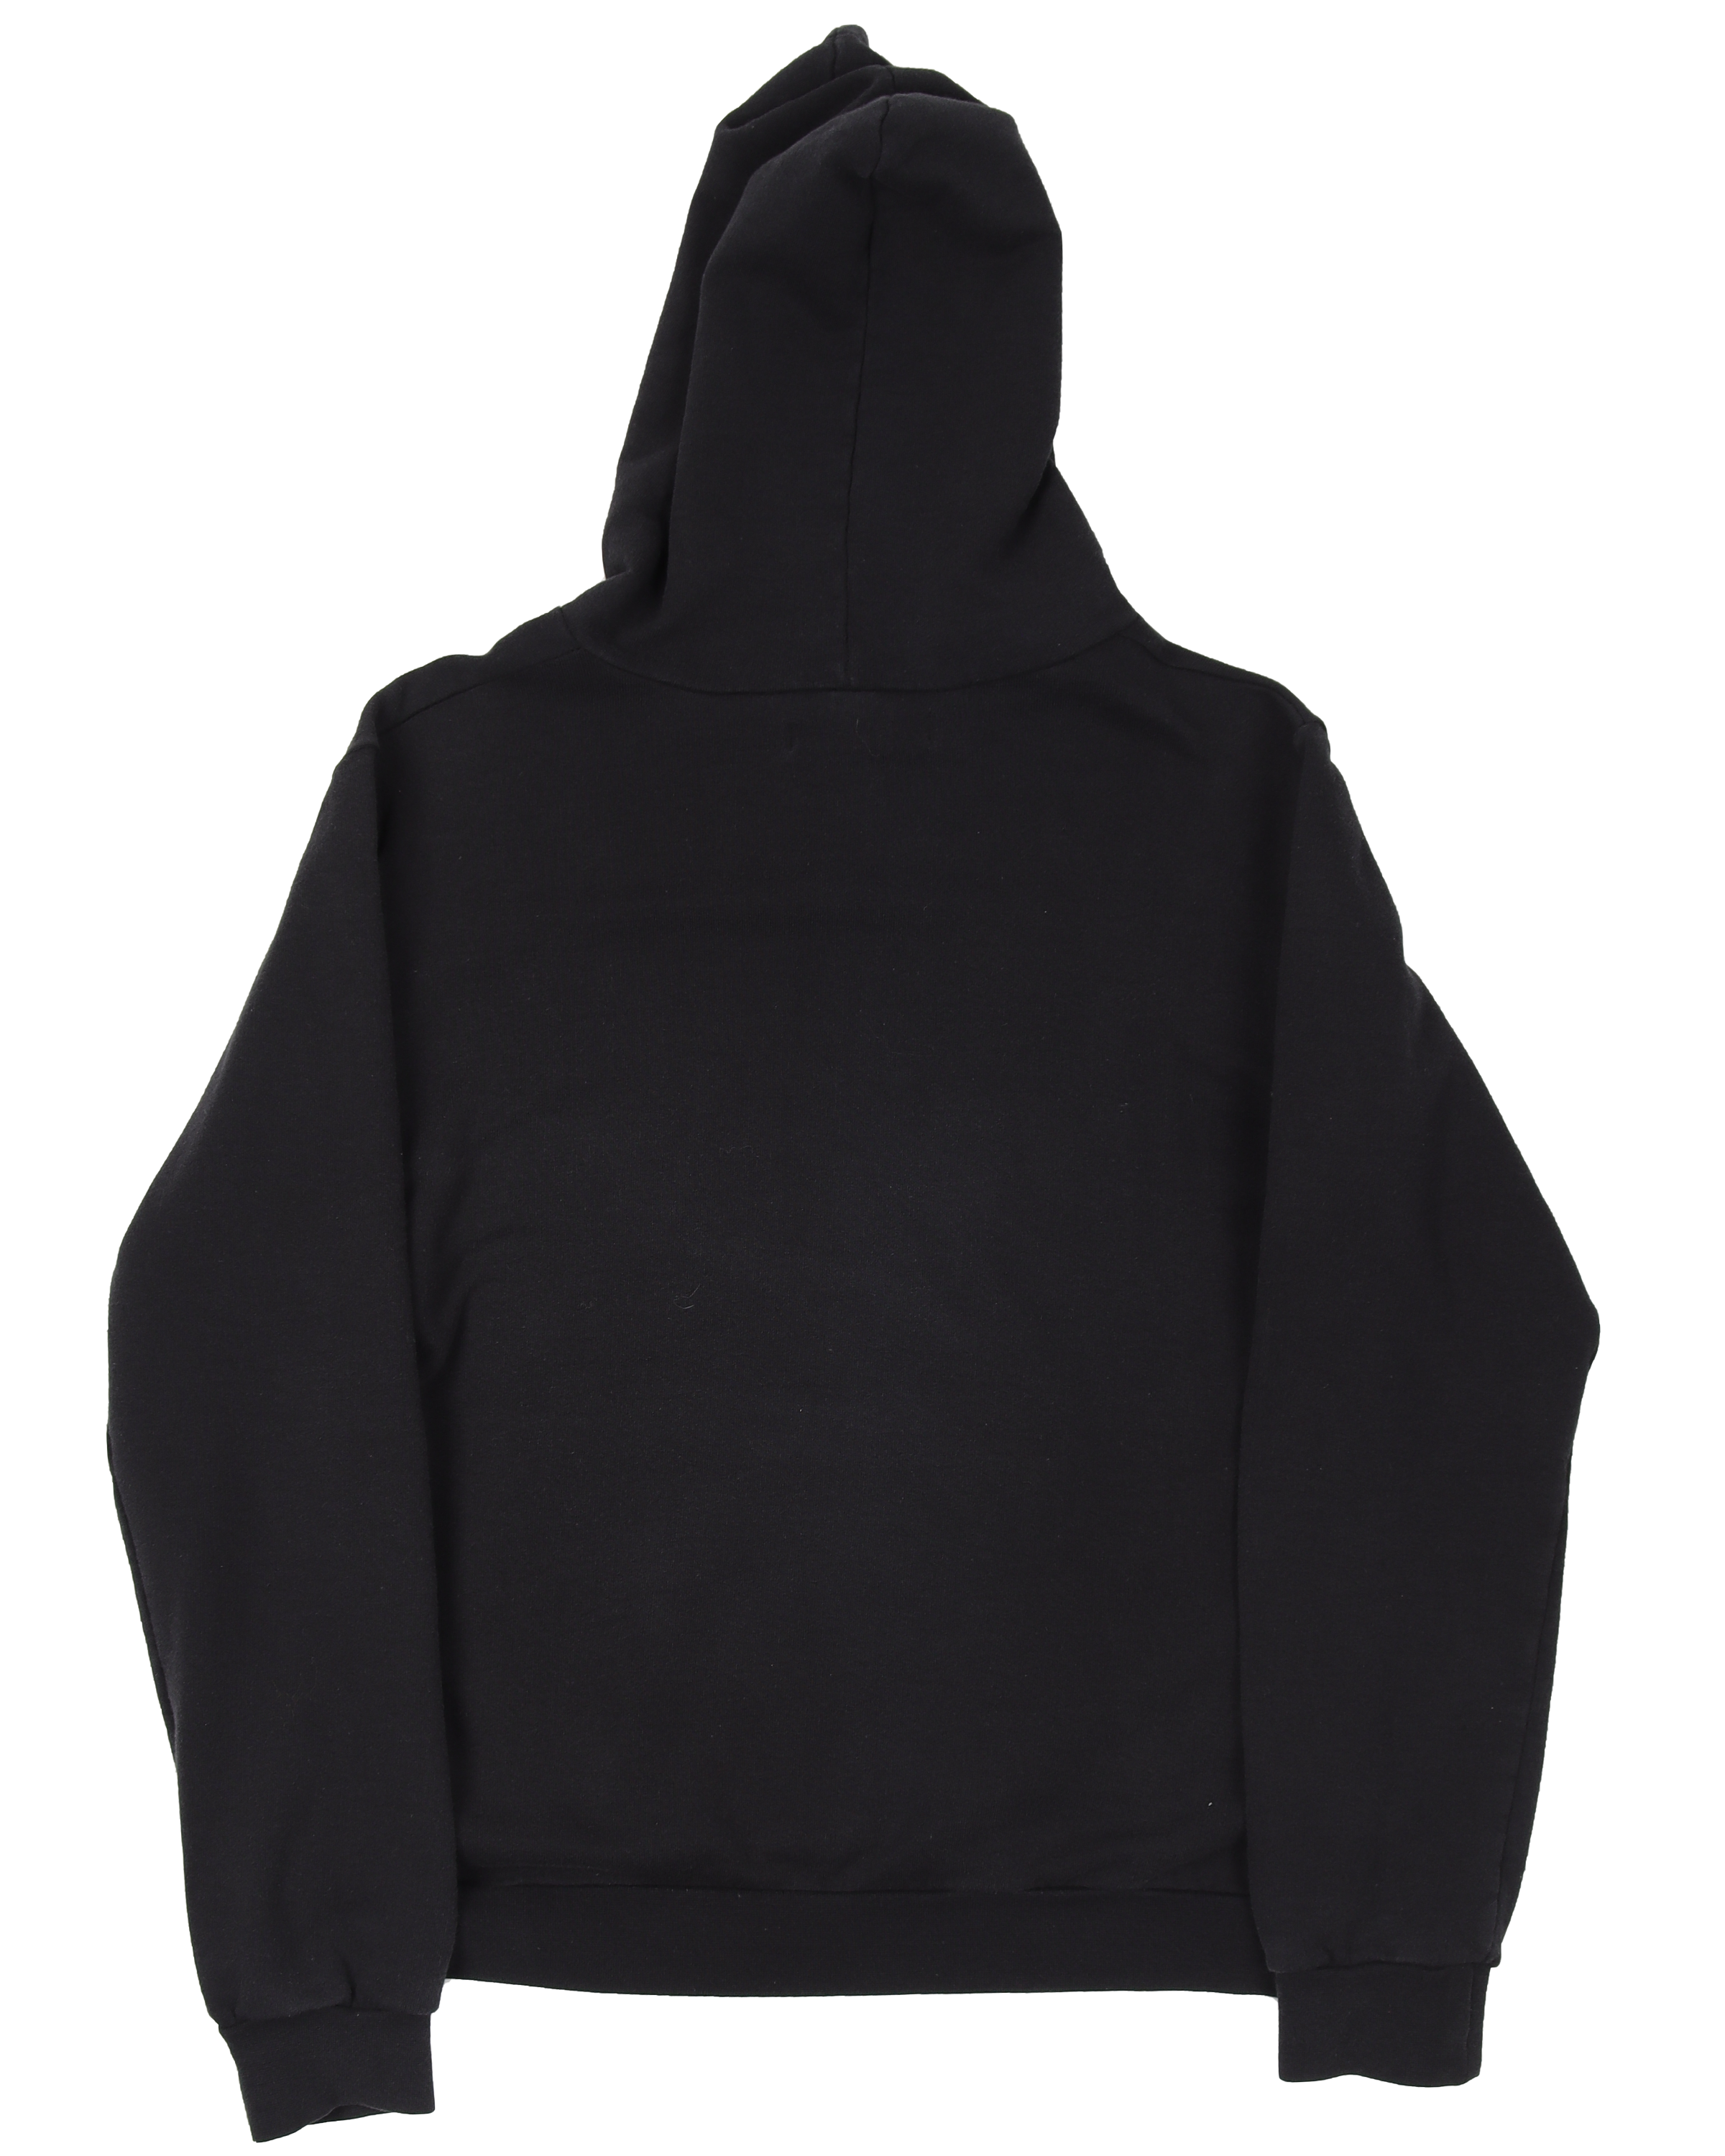 AW03 New Order Hoodie